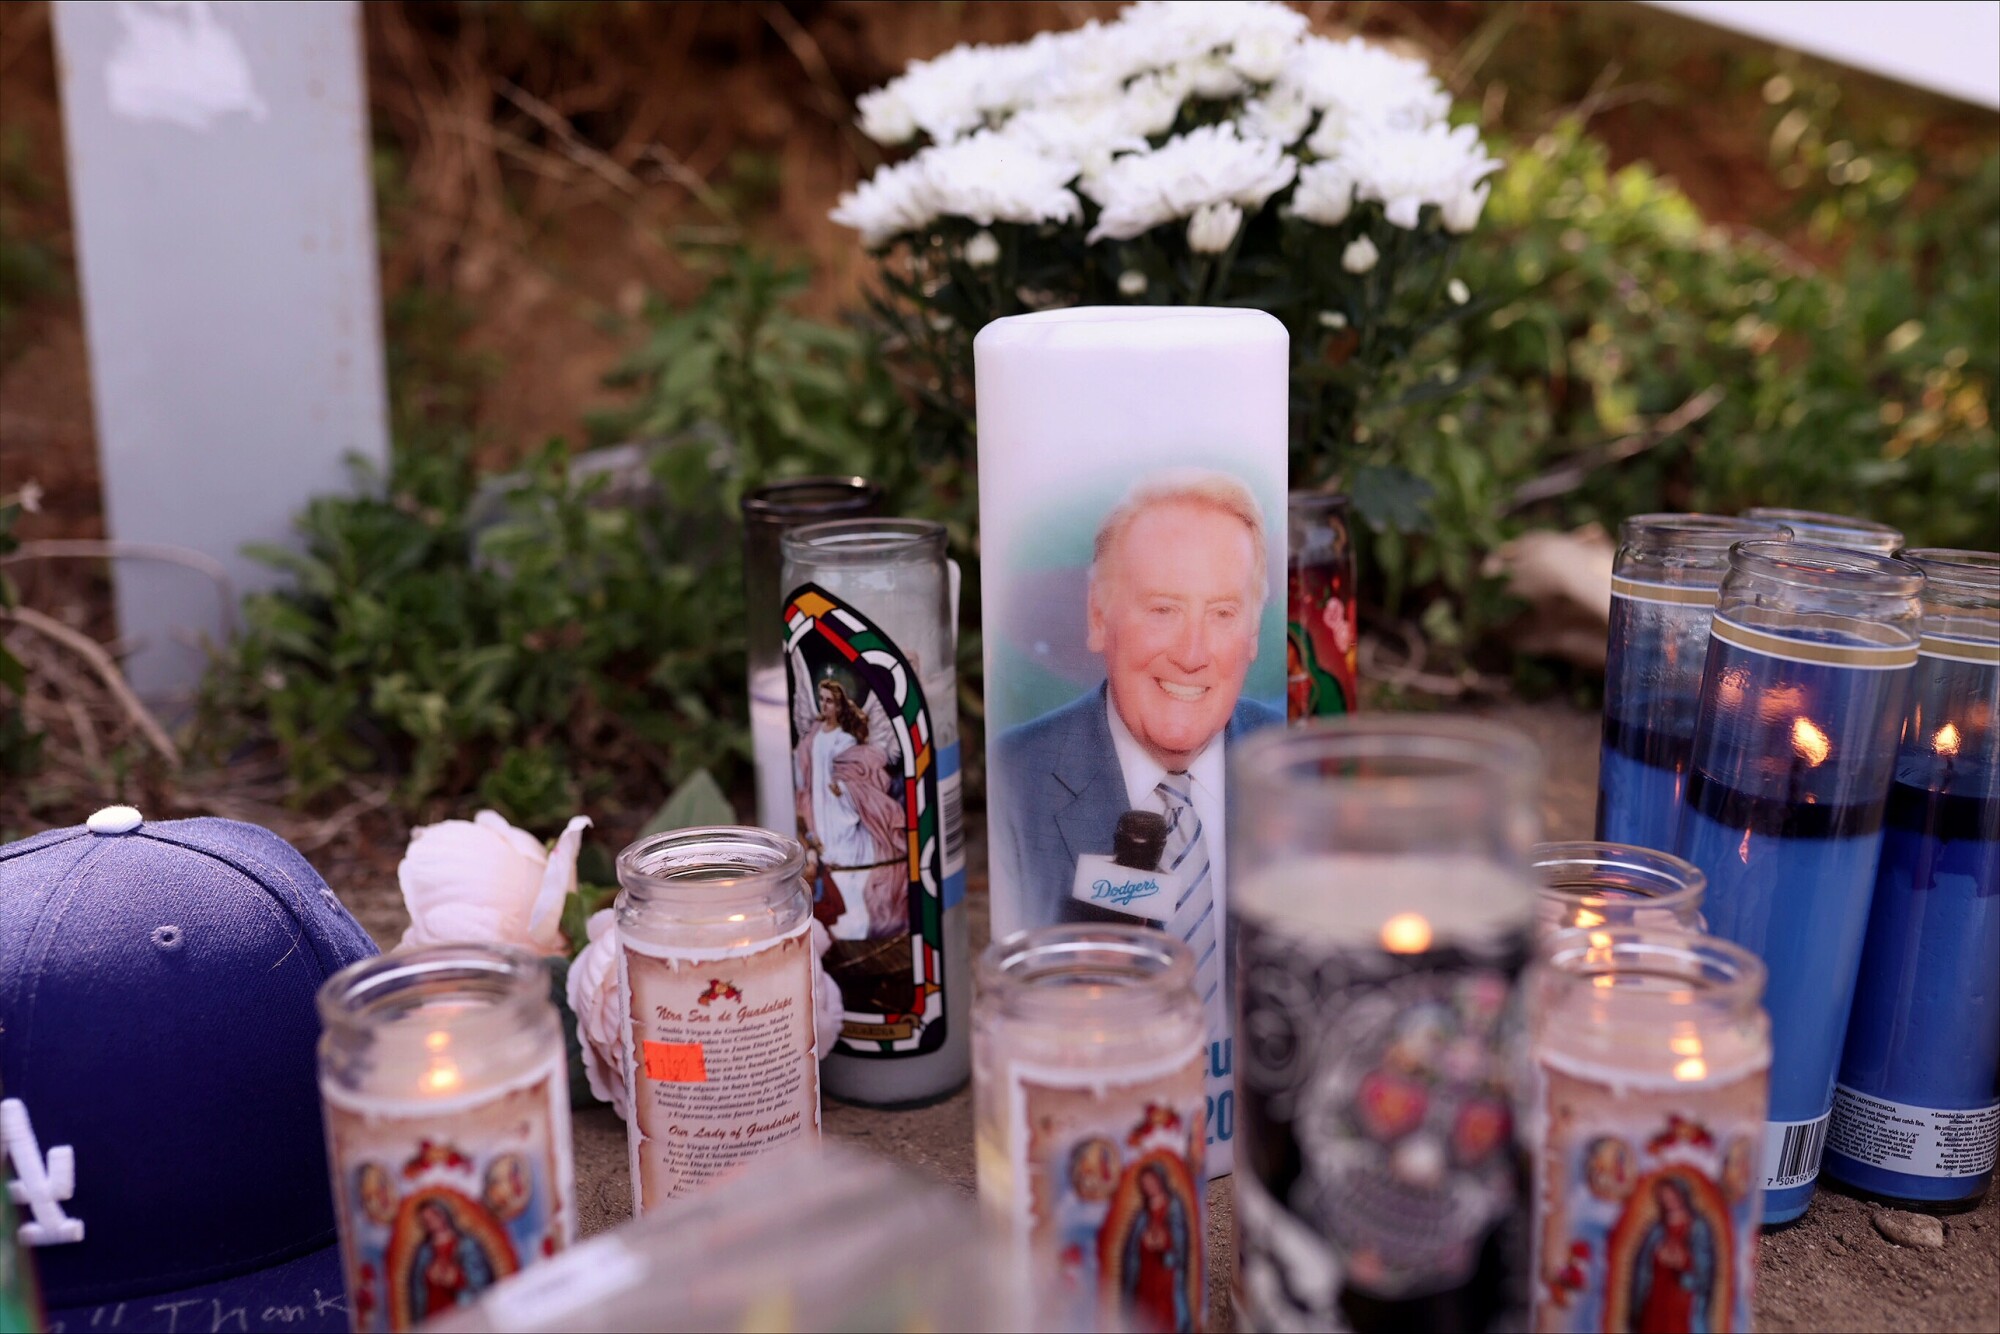 Candles are lit at a growing memorial near Dodger Stadium to legendary Los Angeles Dodgers broadcaster Vin Scully.